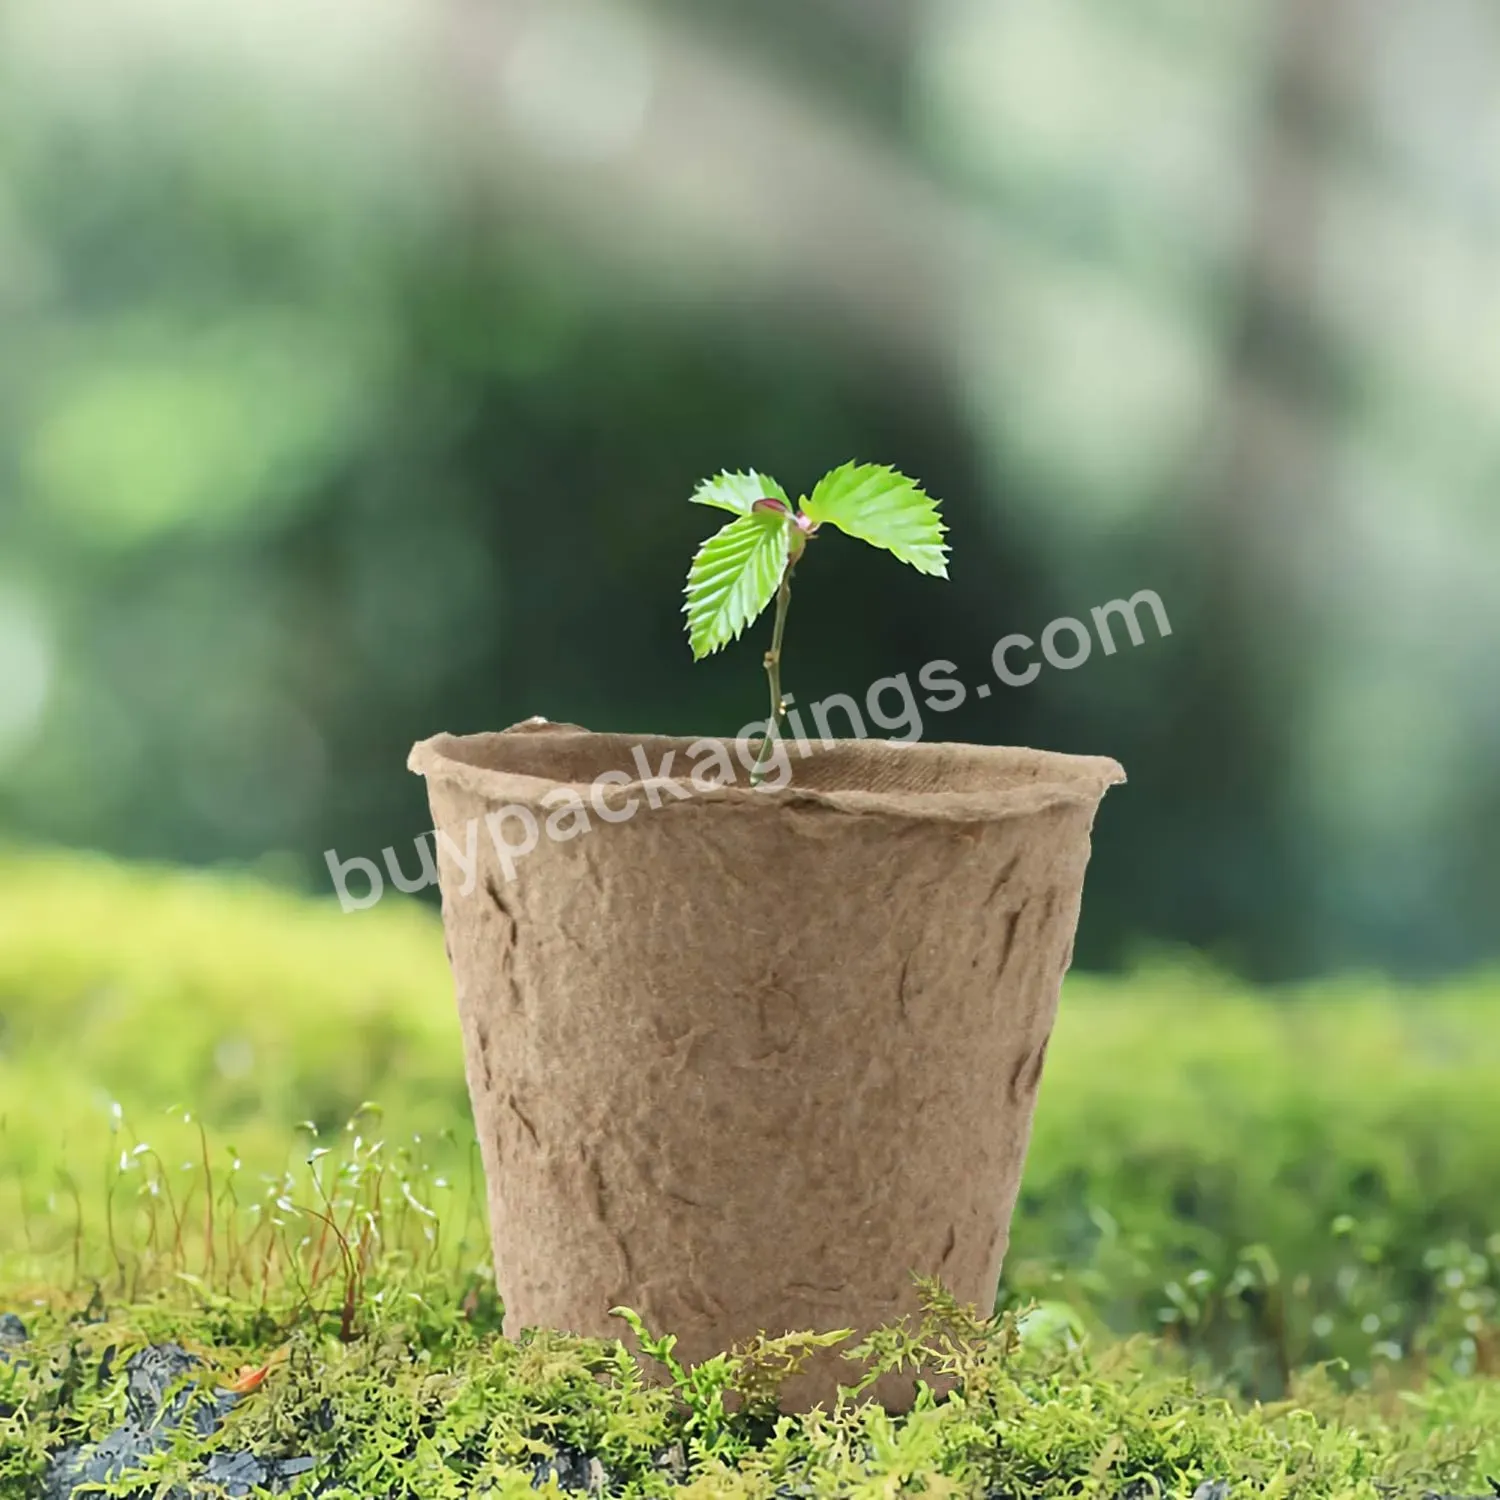 75 Pack 2.4" Peat Nursery Pots For Seedling Pots Organic Biodegradable Paper Pots Herb Seed Starters Kit With 75 Plant Ga